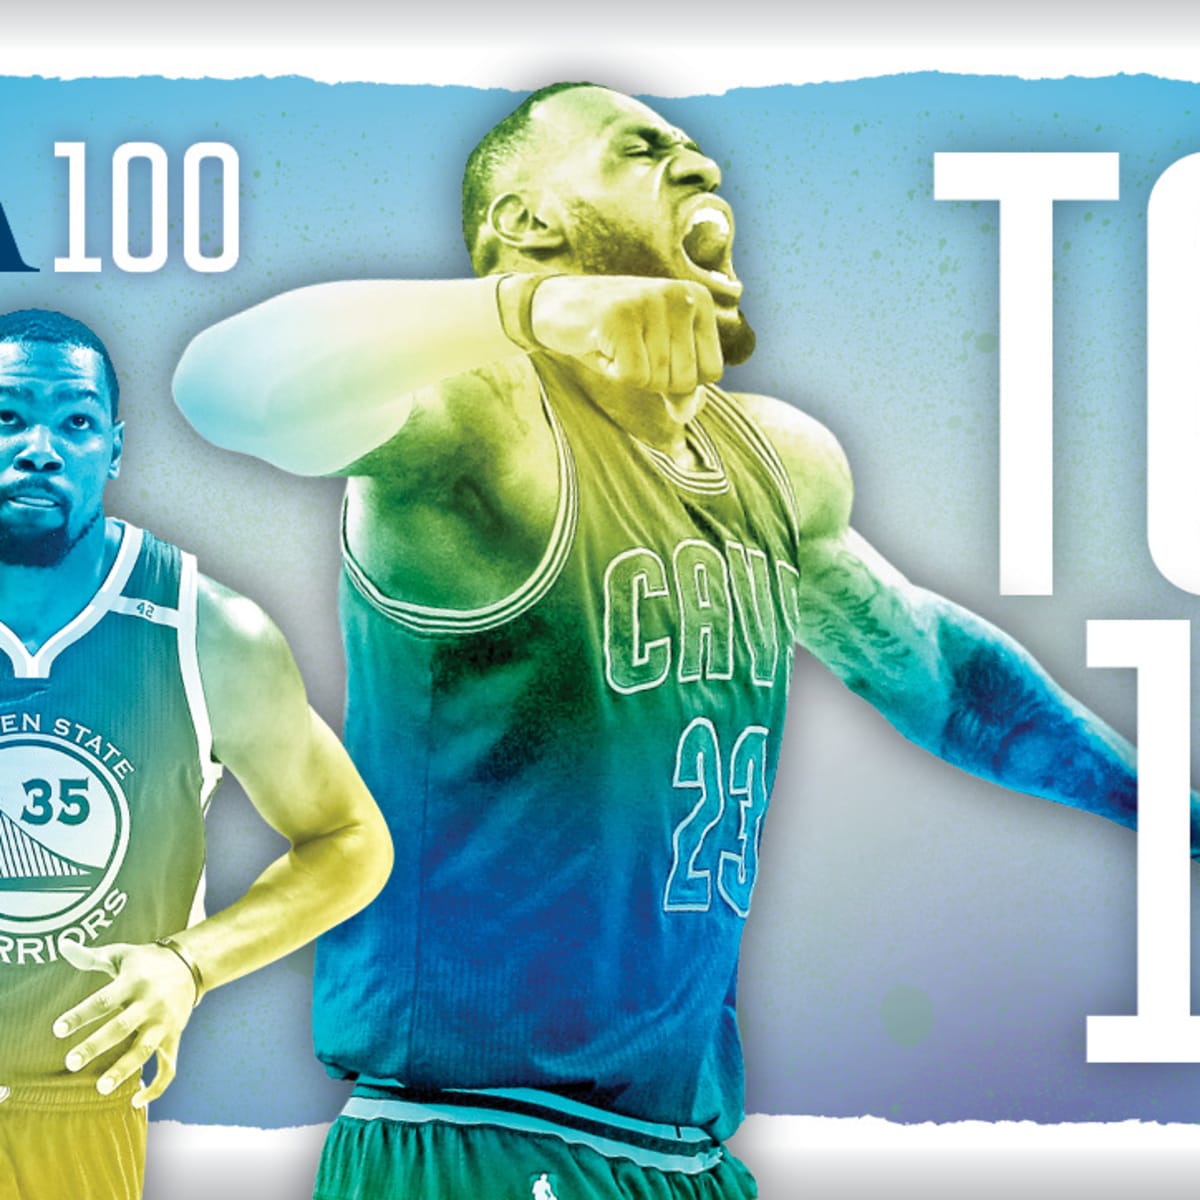 Ranking the 50 greatest NBA players of all time (through 2017-18)